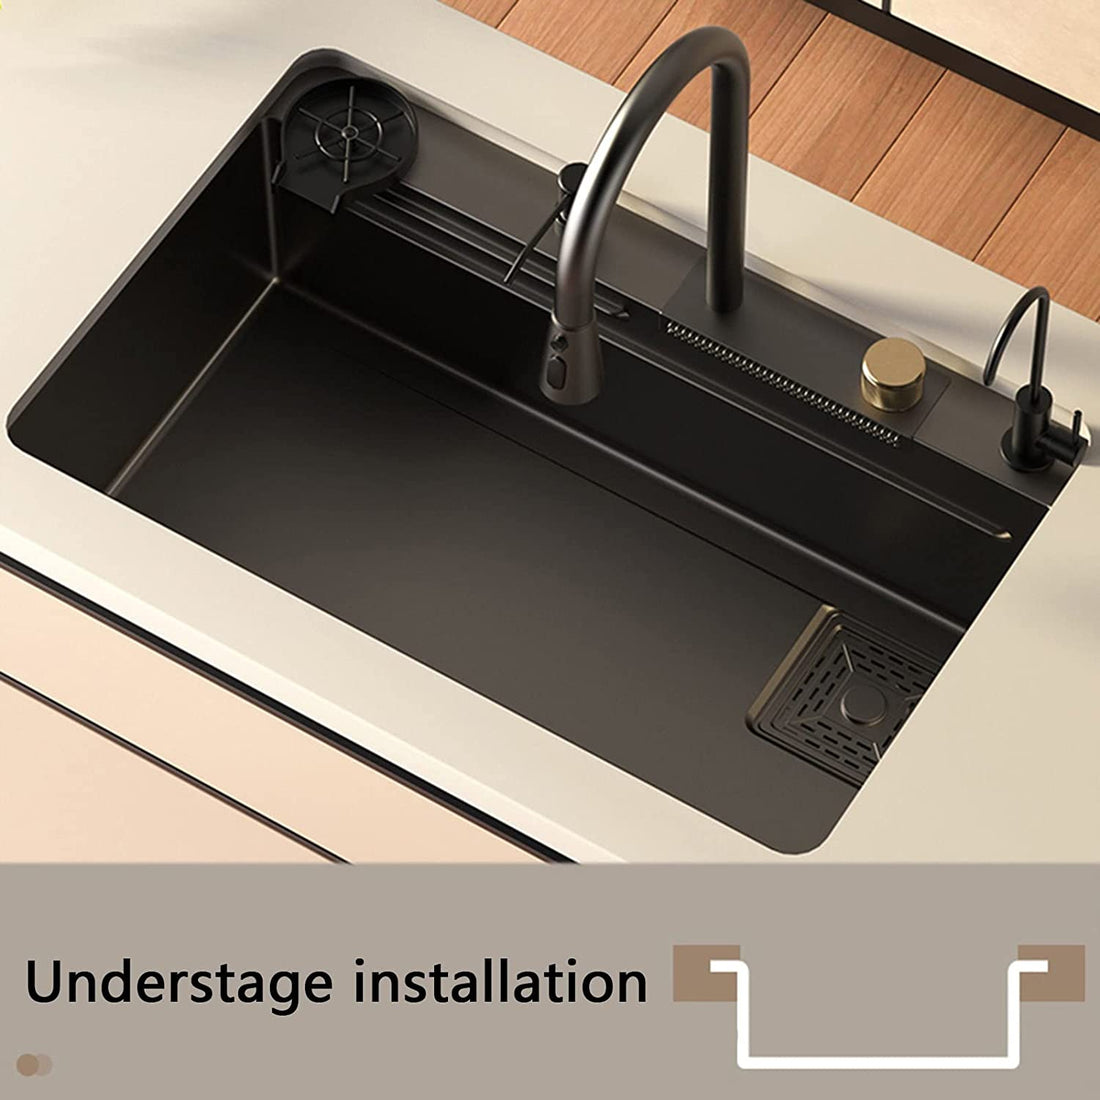 Latest Sink for kitchen InArt Waterfall Kitchen Sink Nano Stainless Steel Single Bowl Black Color 32x18 Inches With Pull-out and Waterfall Faucet, RO tap, Cup washer, Drain Basket Handmade Multi-purpose Sink - InArt-Studio